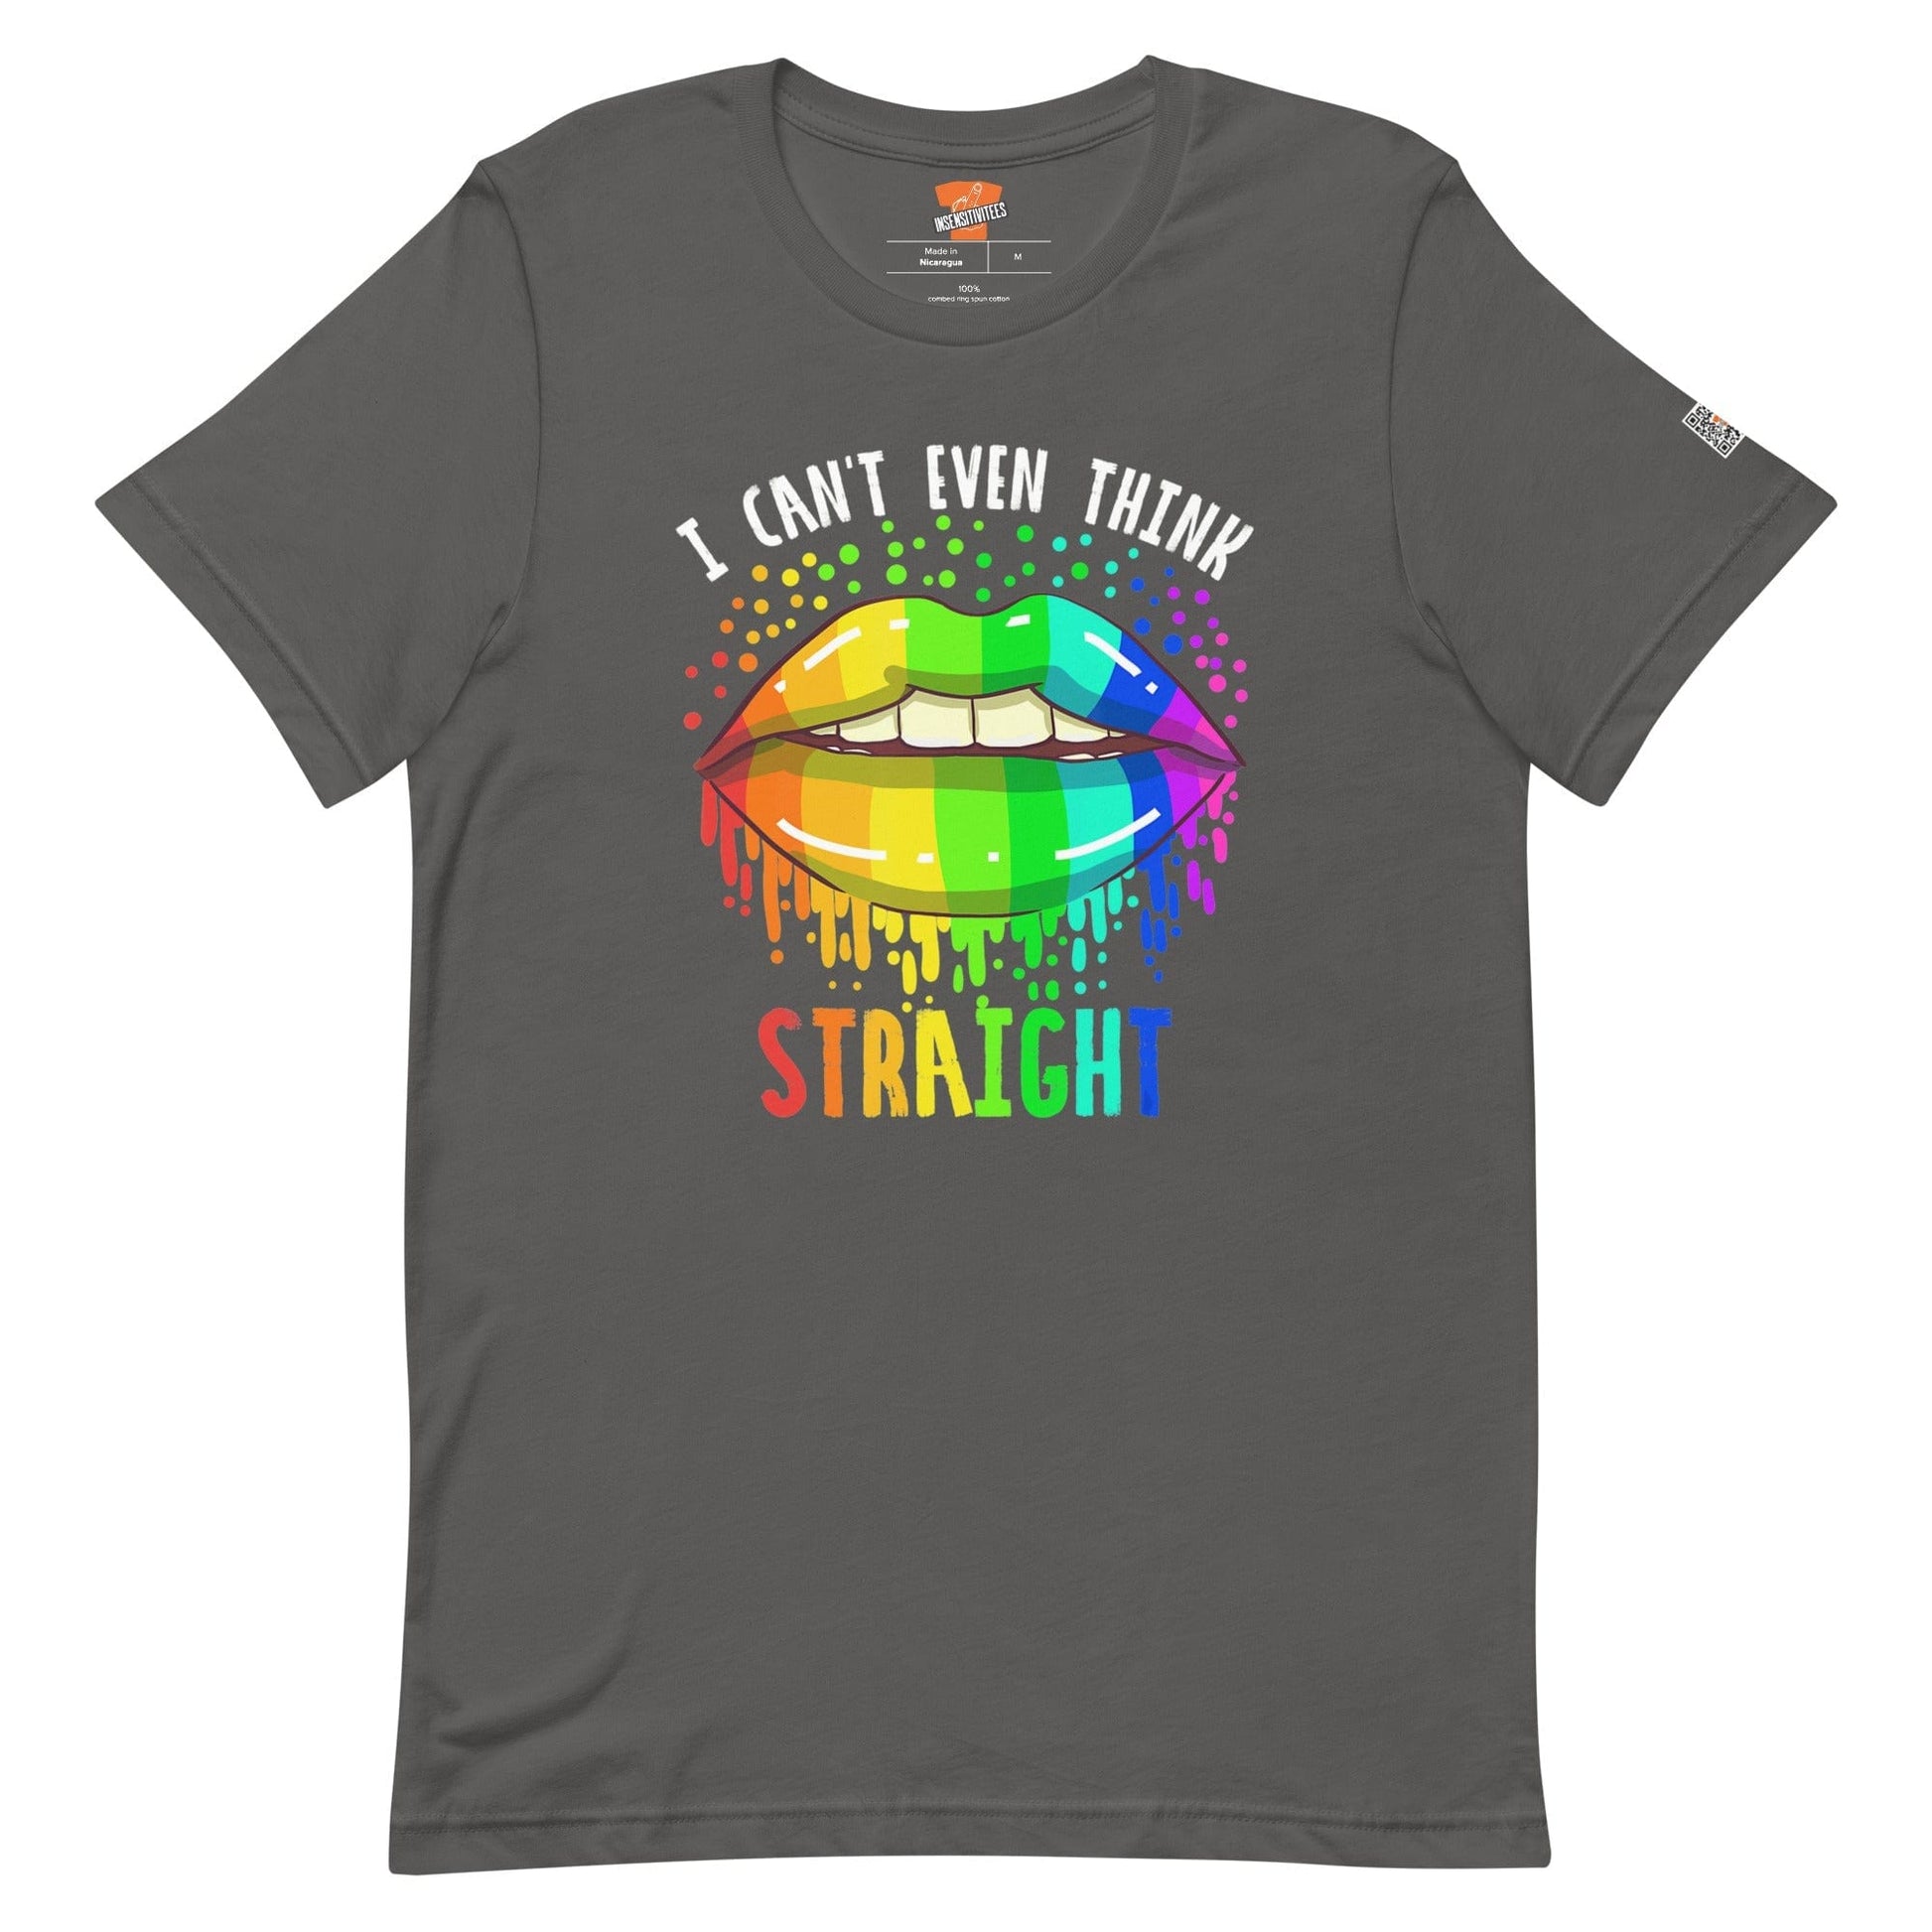 InsensitiviTees™️ Asphalt / S Can't Think Straight Limited Edition Unisex T-shirt